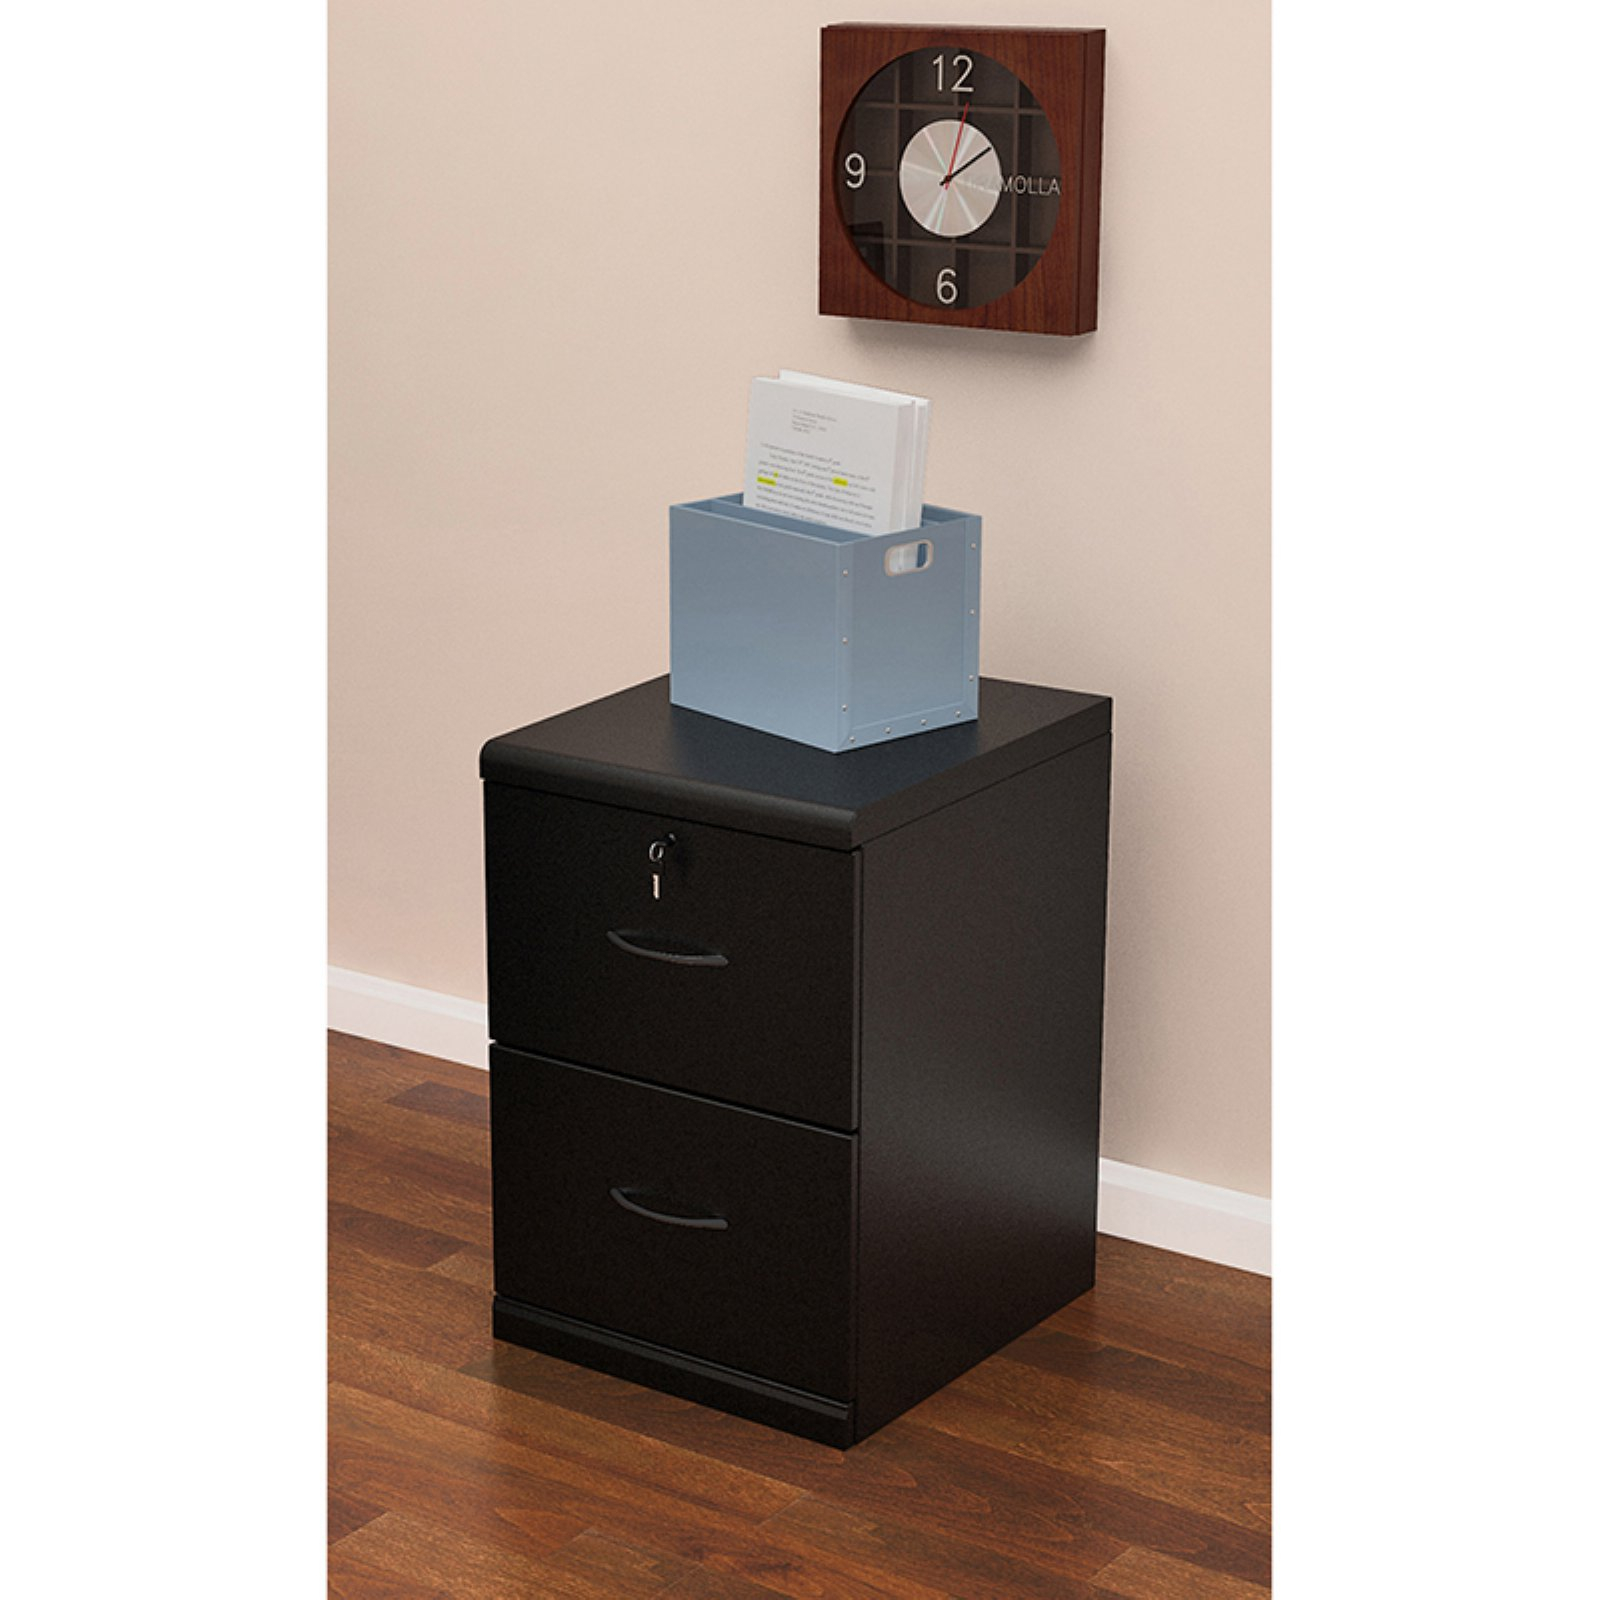 2 Drawer Vertical Wood Lockable Filing Cabinet Black Walmart with dimensions 1600 X 1600